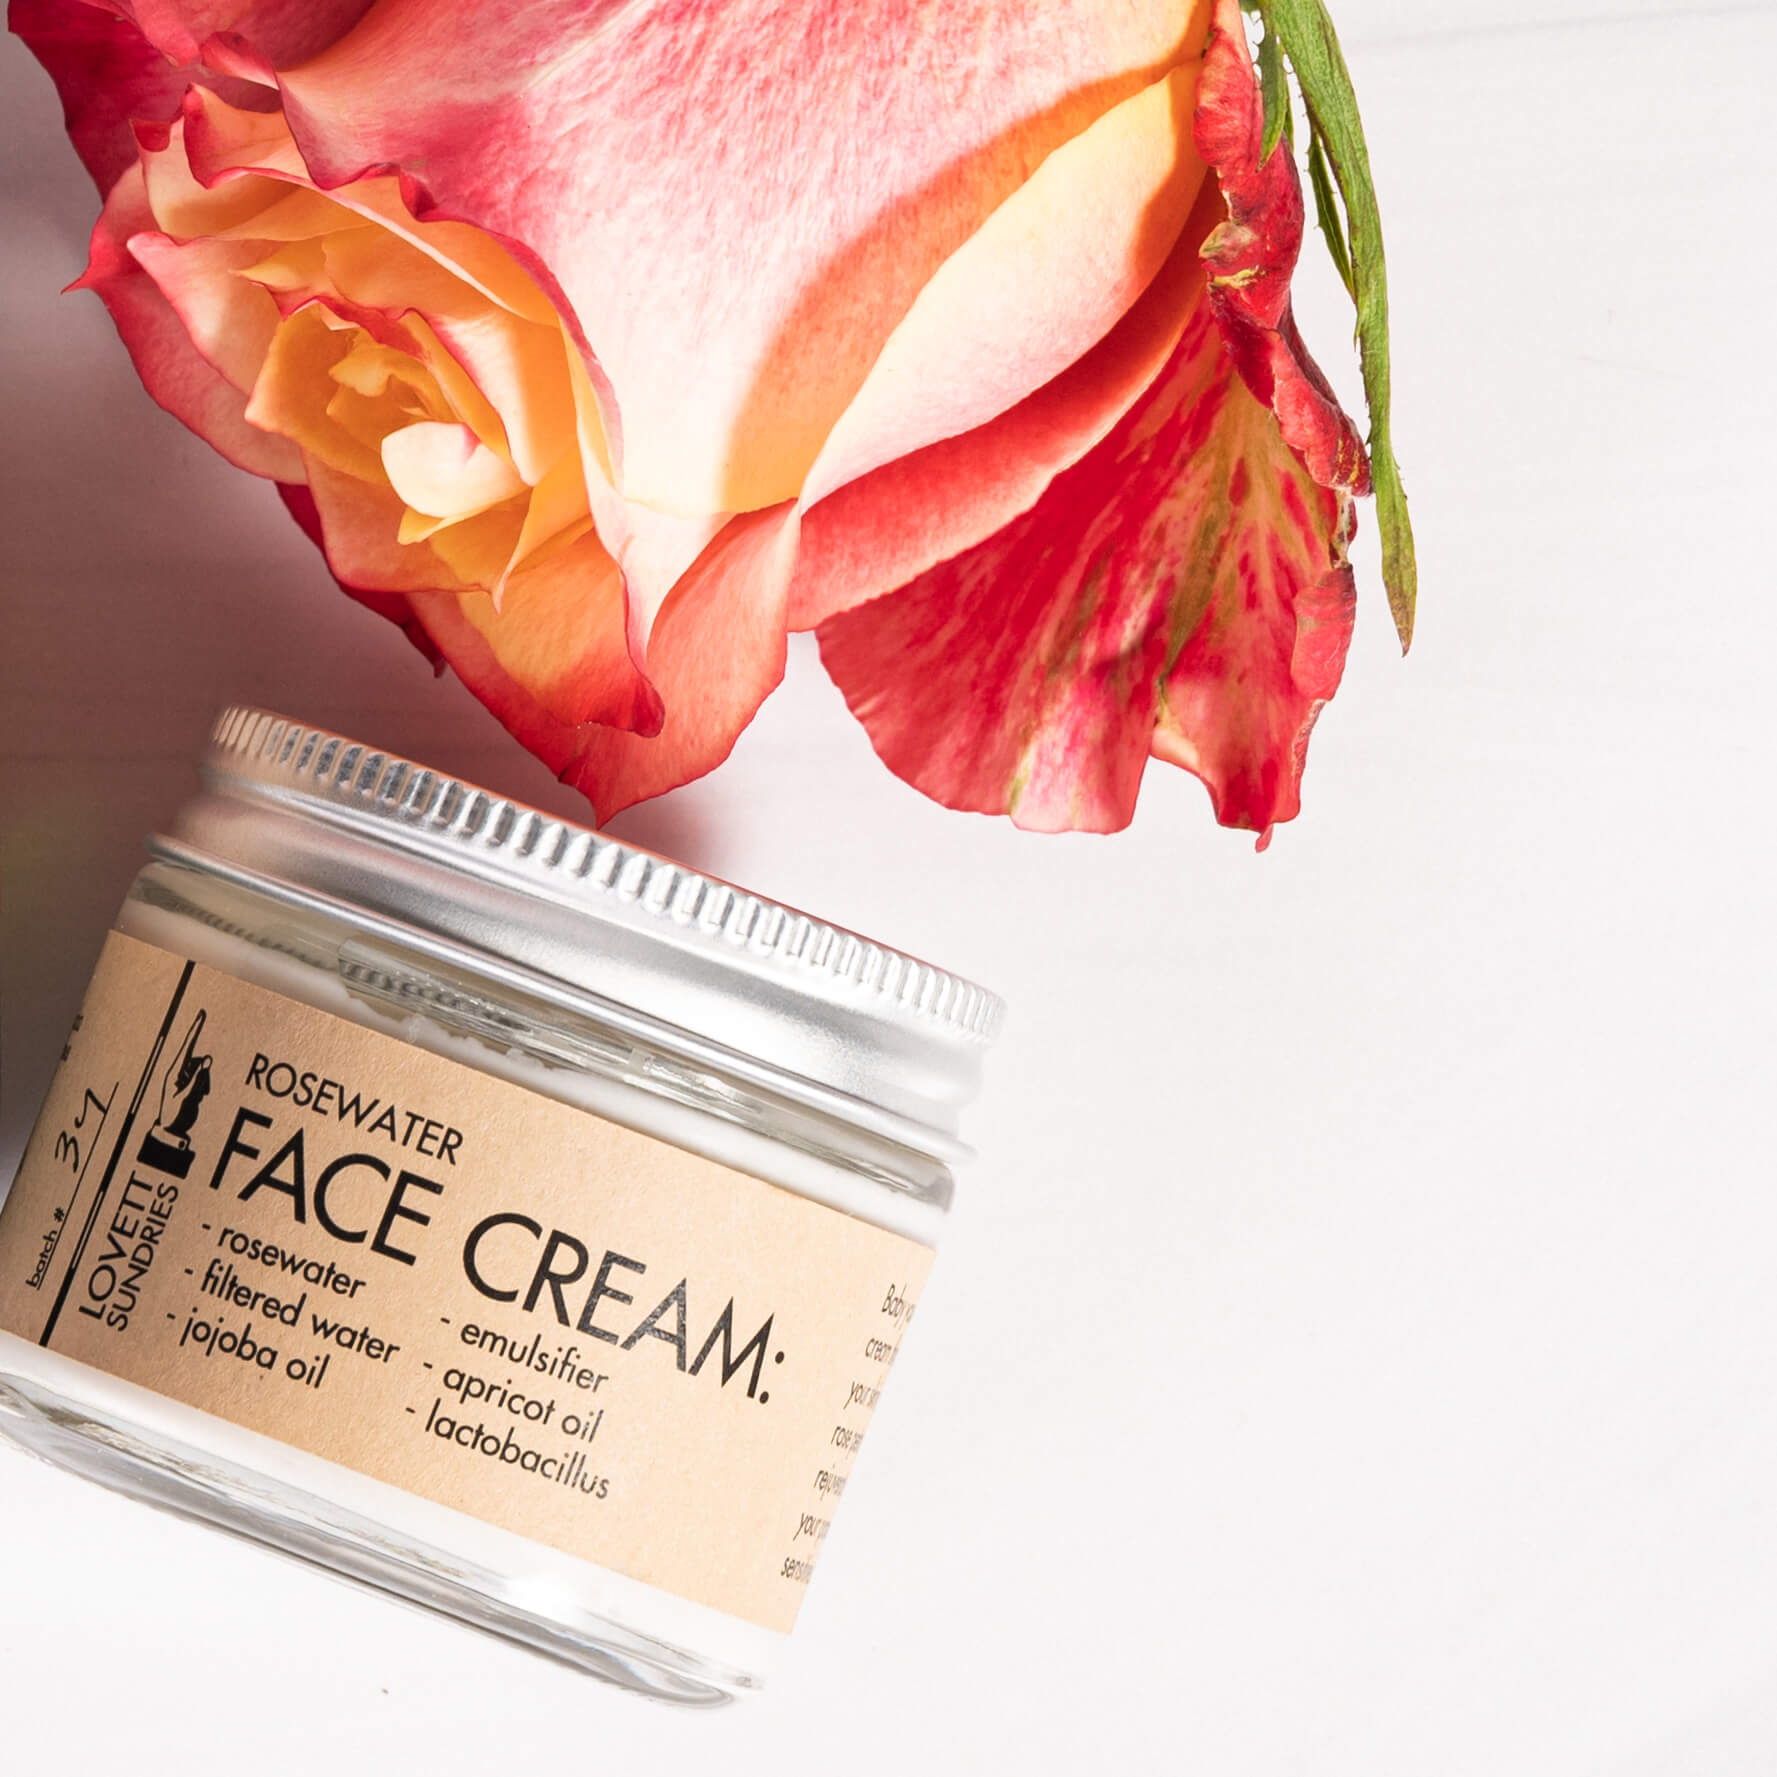 A jar of rosewater face cream next to a rose.